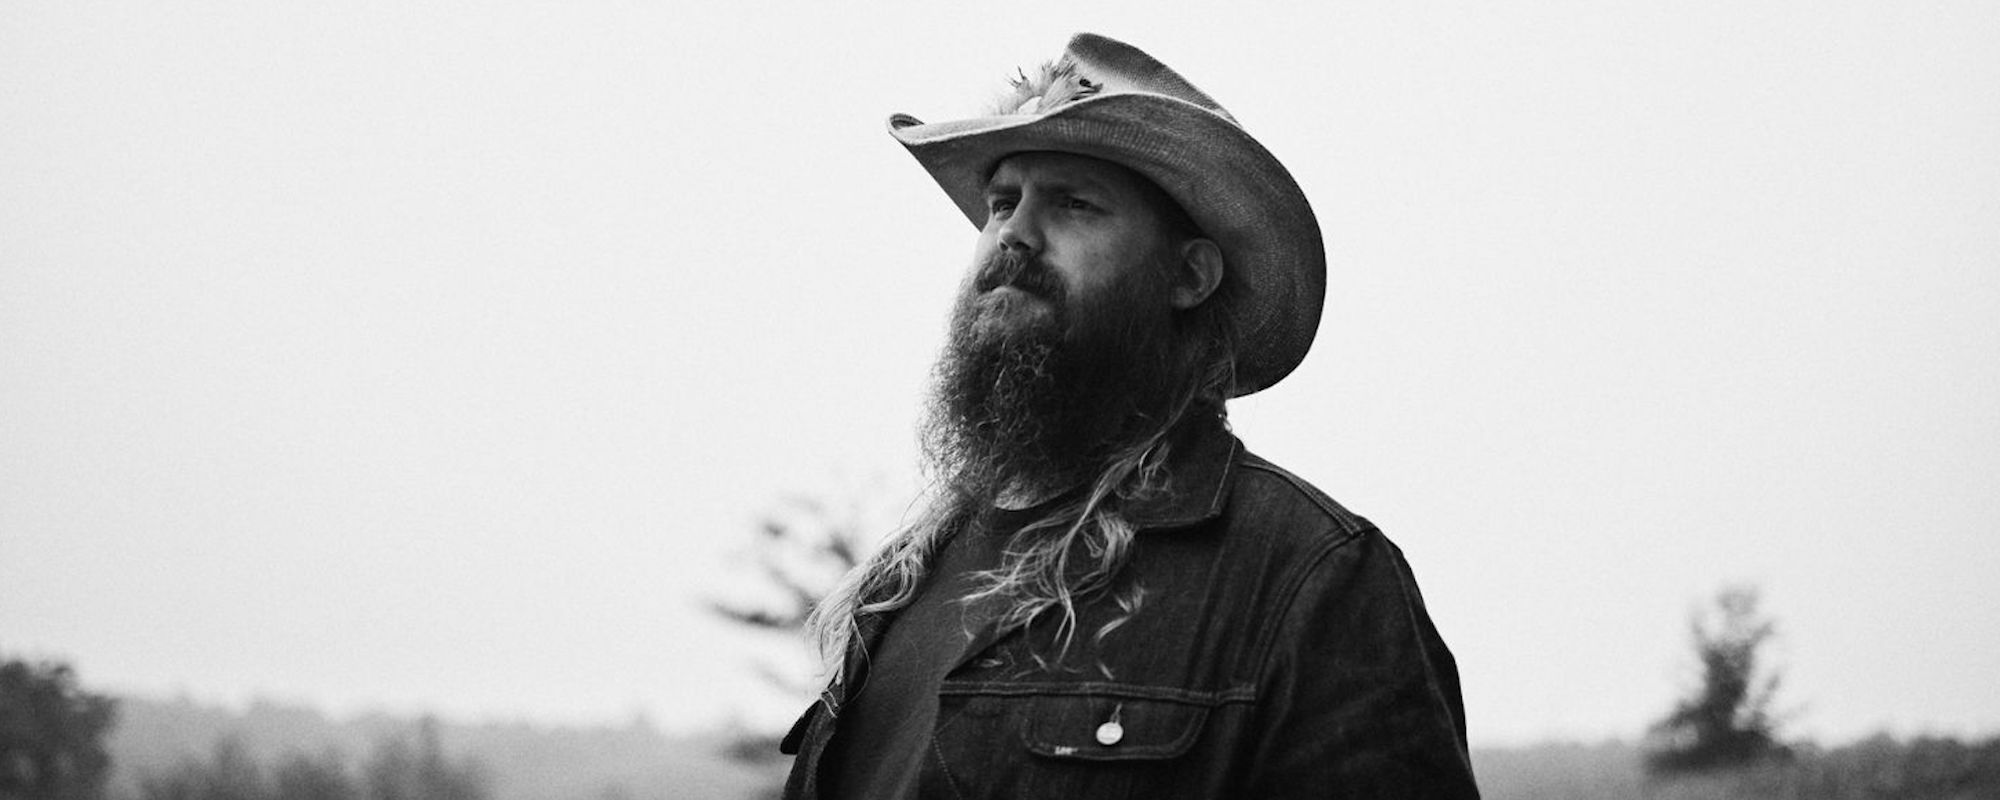 Chris Stapleton Gets Country Music Hall of Fame Exhibit